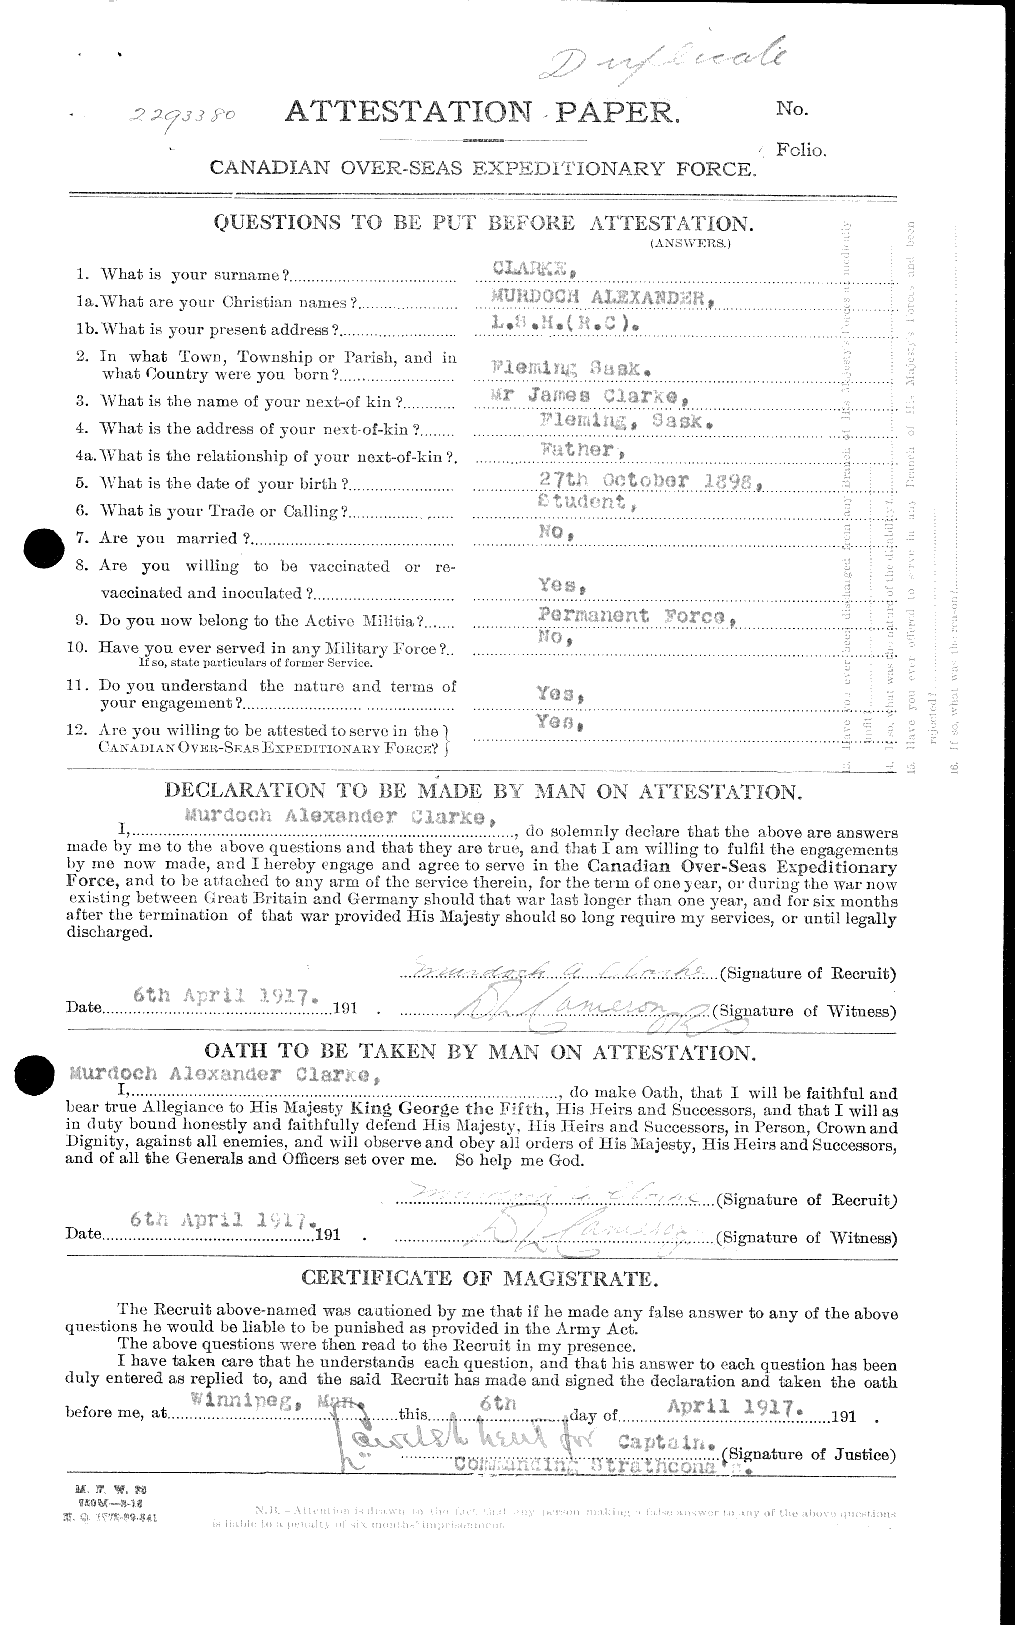 Personnel Records of the First World War - CEF 023454a